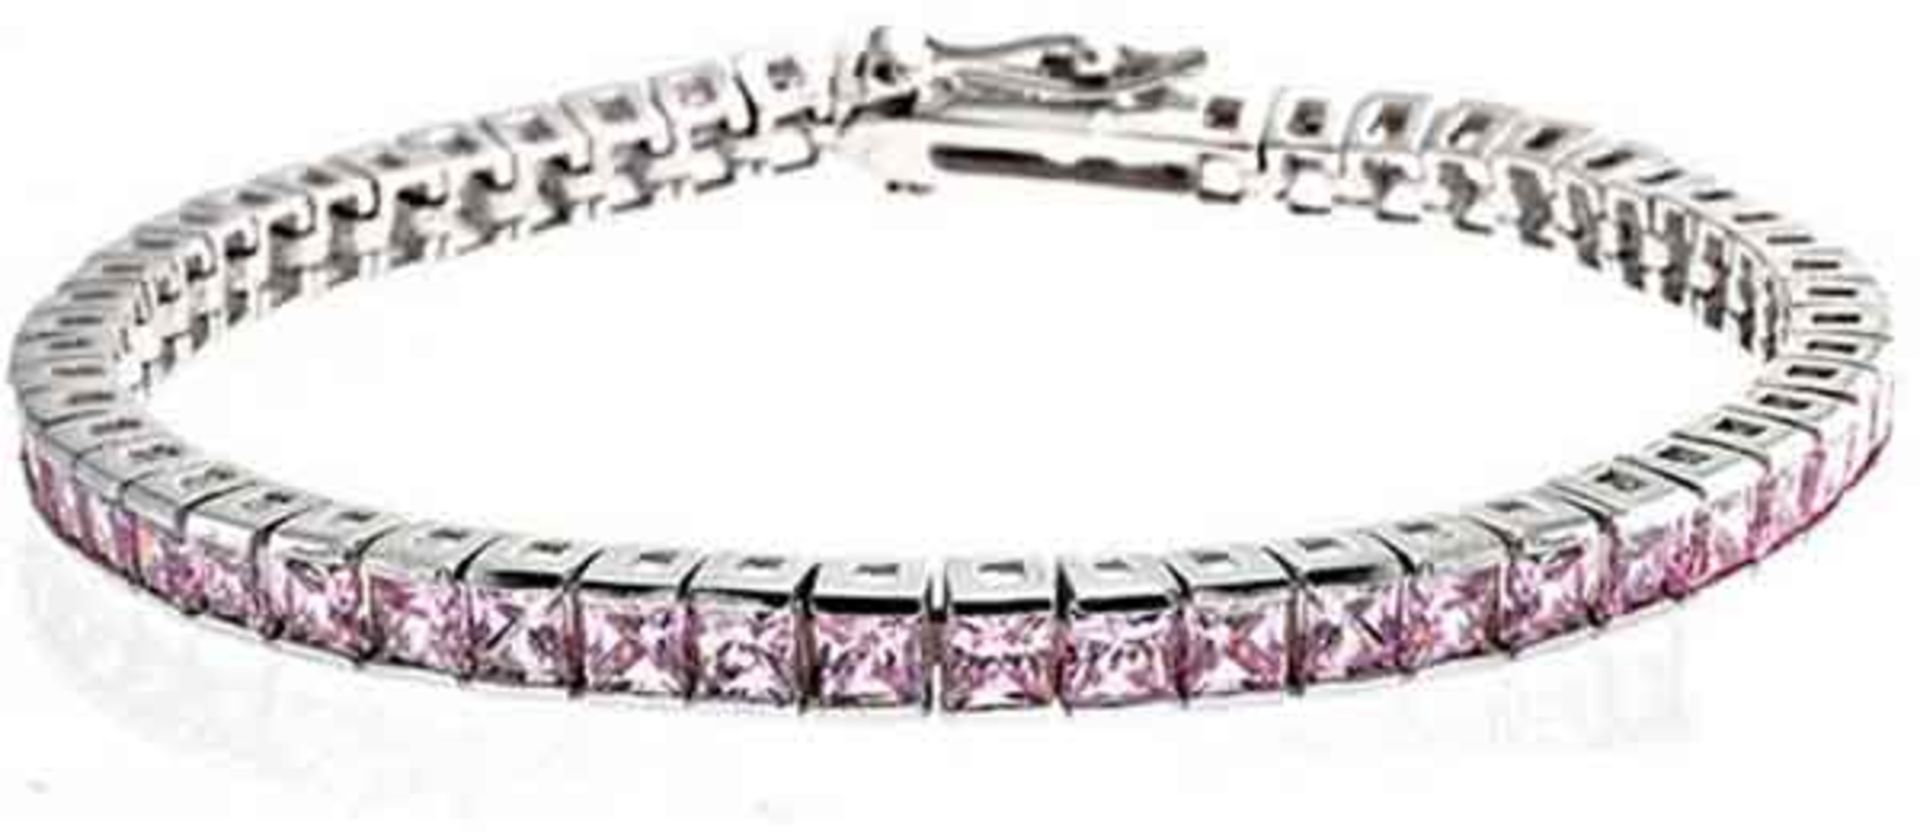 V Brand New Platinum Plated Pink Stone Tennis Bracelet X 2 YOUR BID PRICE TO BE MULTIPLIED BY TWO